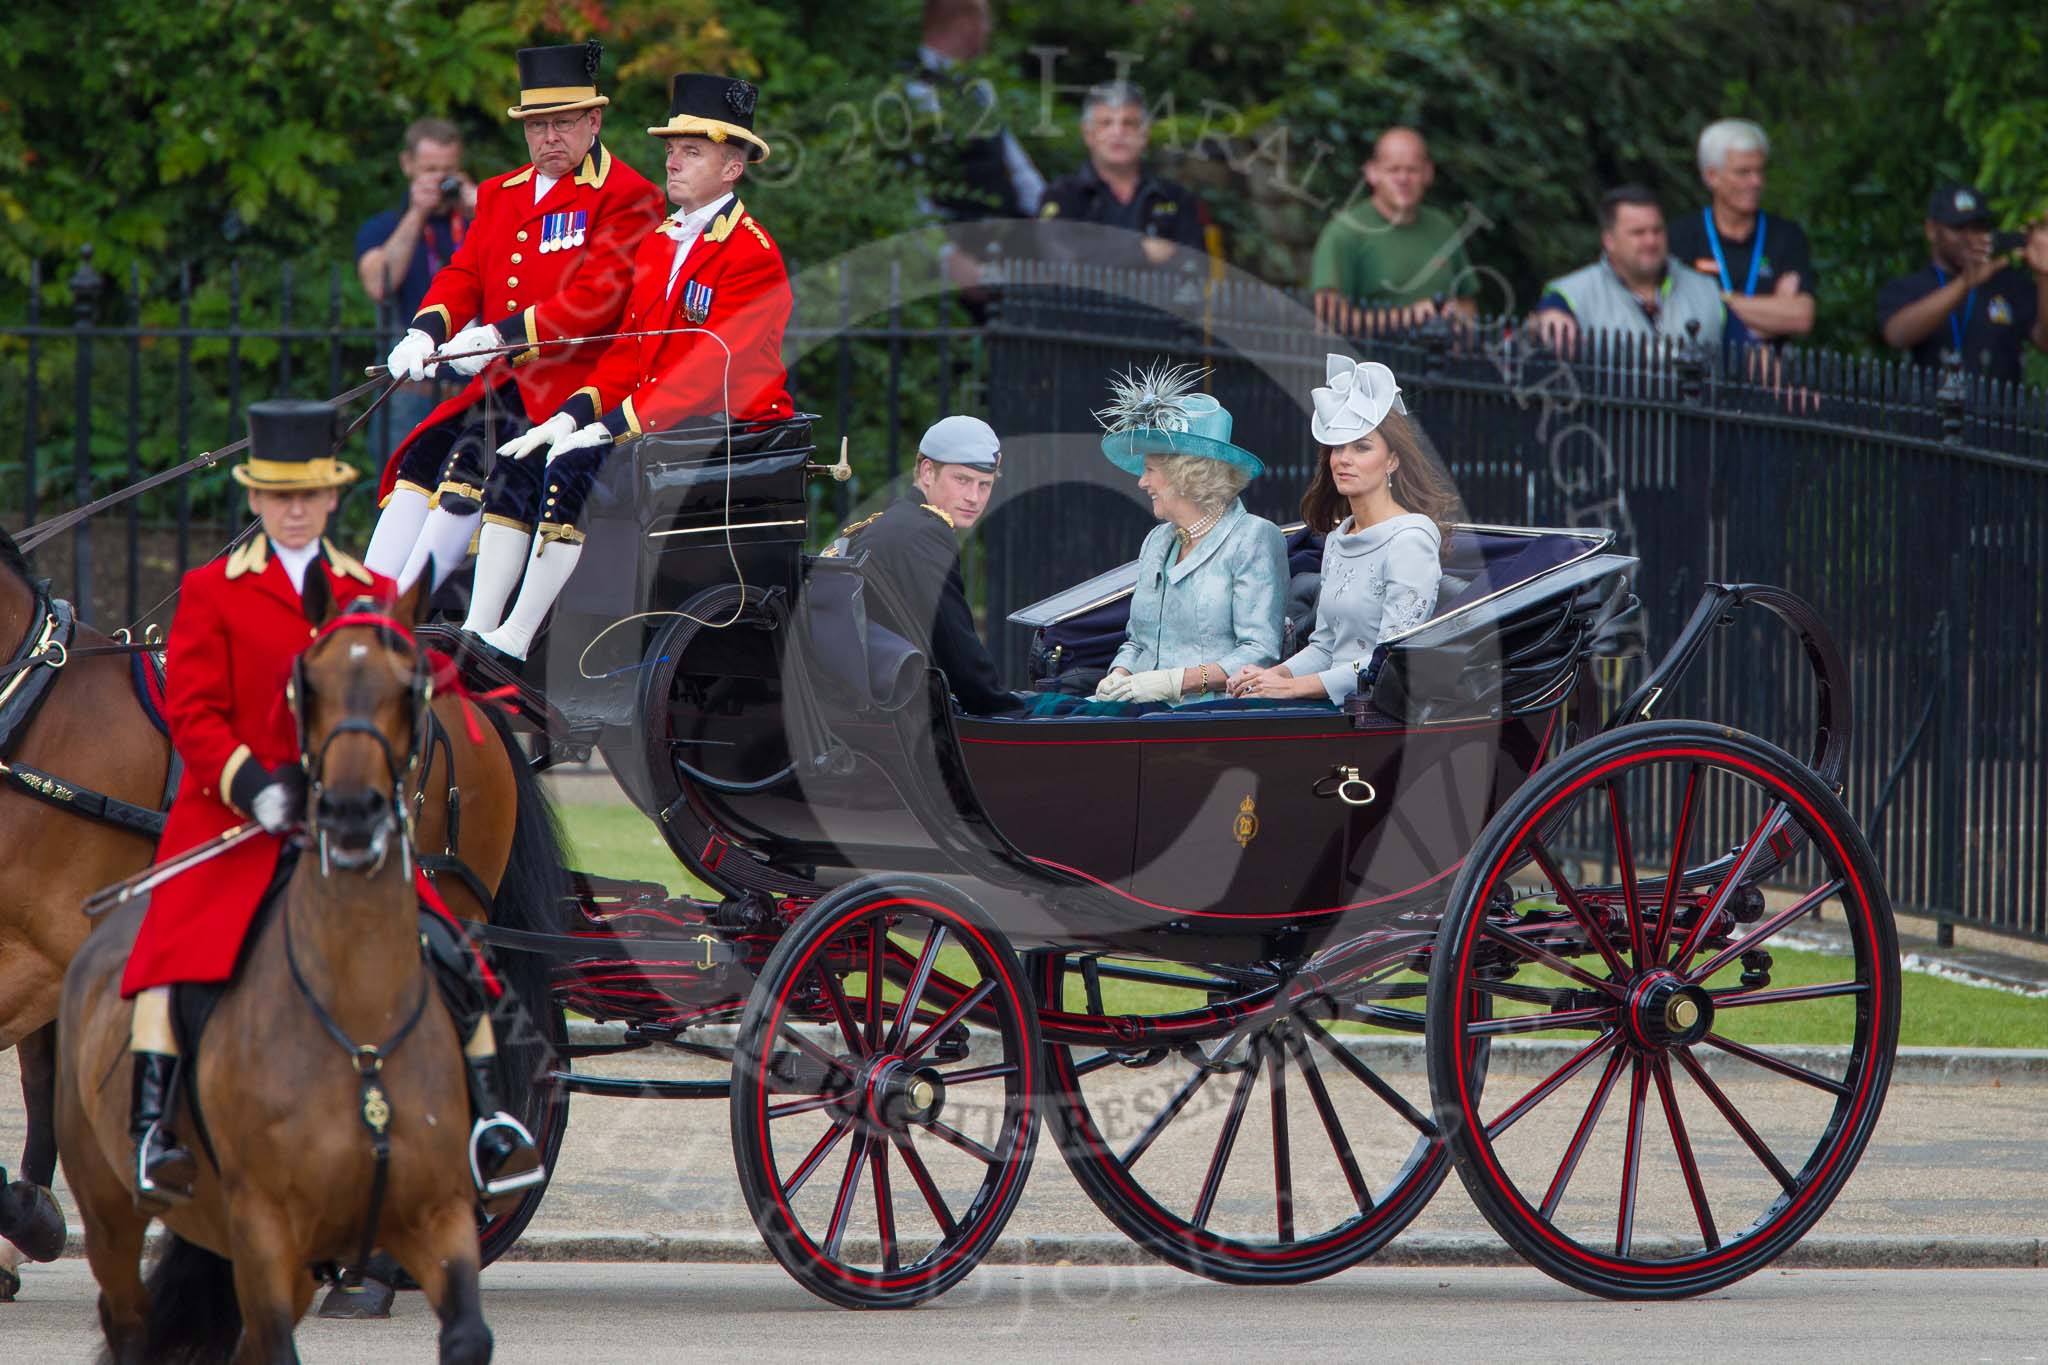 Trooping the Colour 2012: Prince Harry, the Ducess of Cornwall, and the Duchess of Cambridge in the first carriage..
Horse Guards Parade, Westminster,
London SW1,

United Kingdom,
on 16 June 2012 at 10:50, image #117